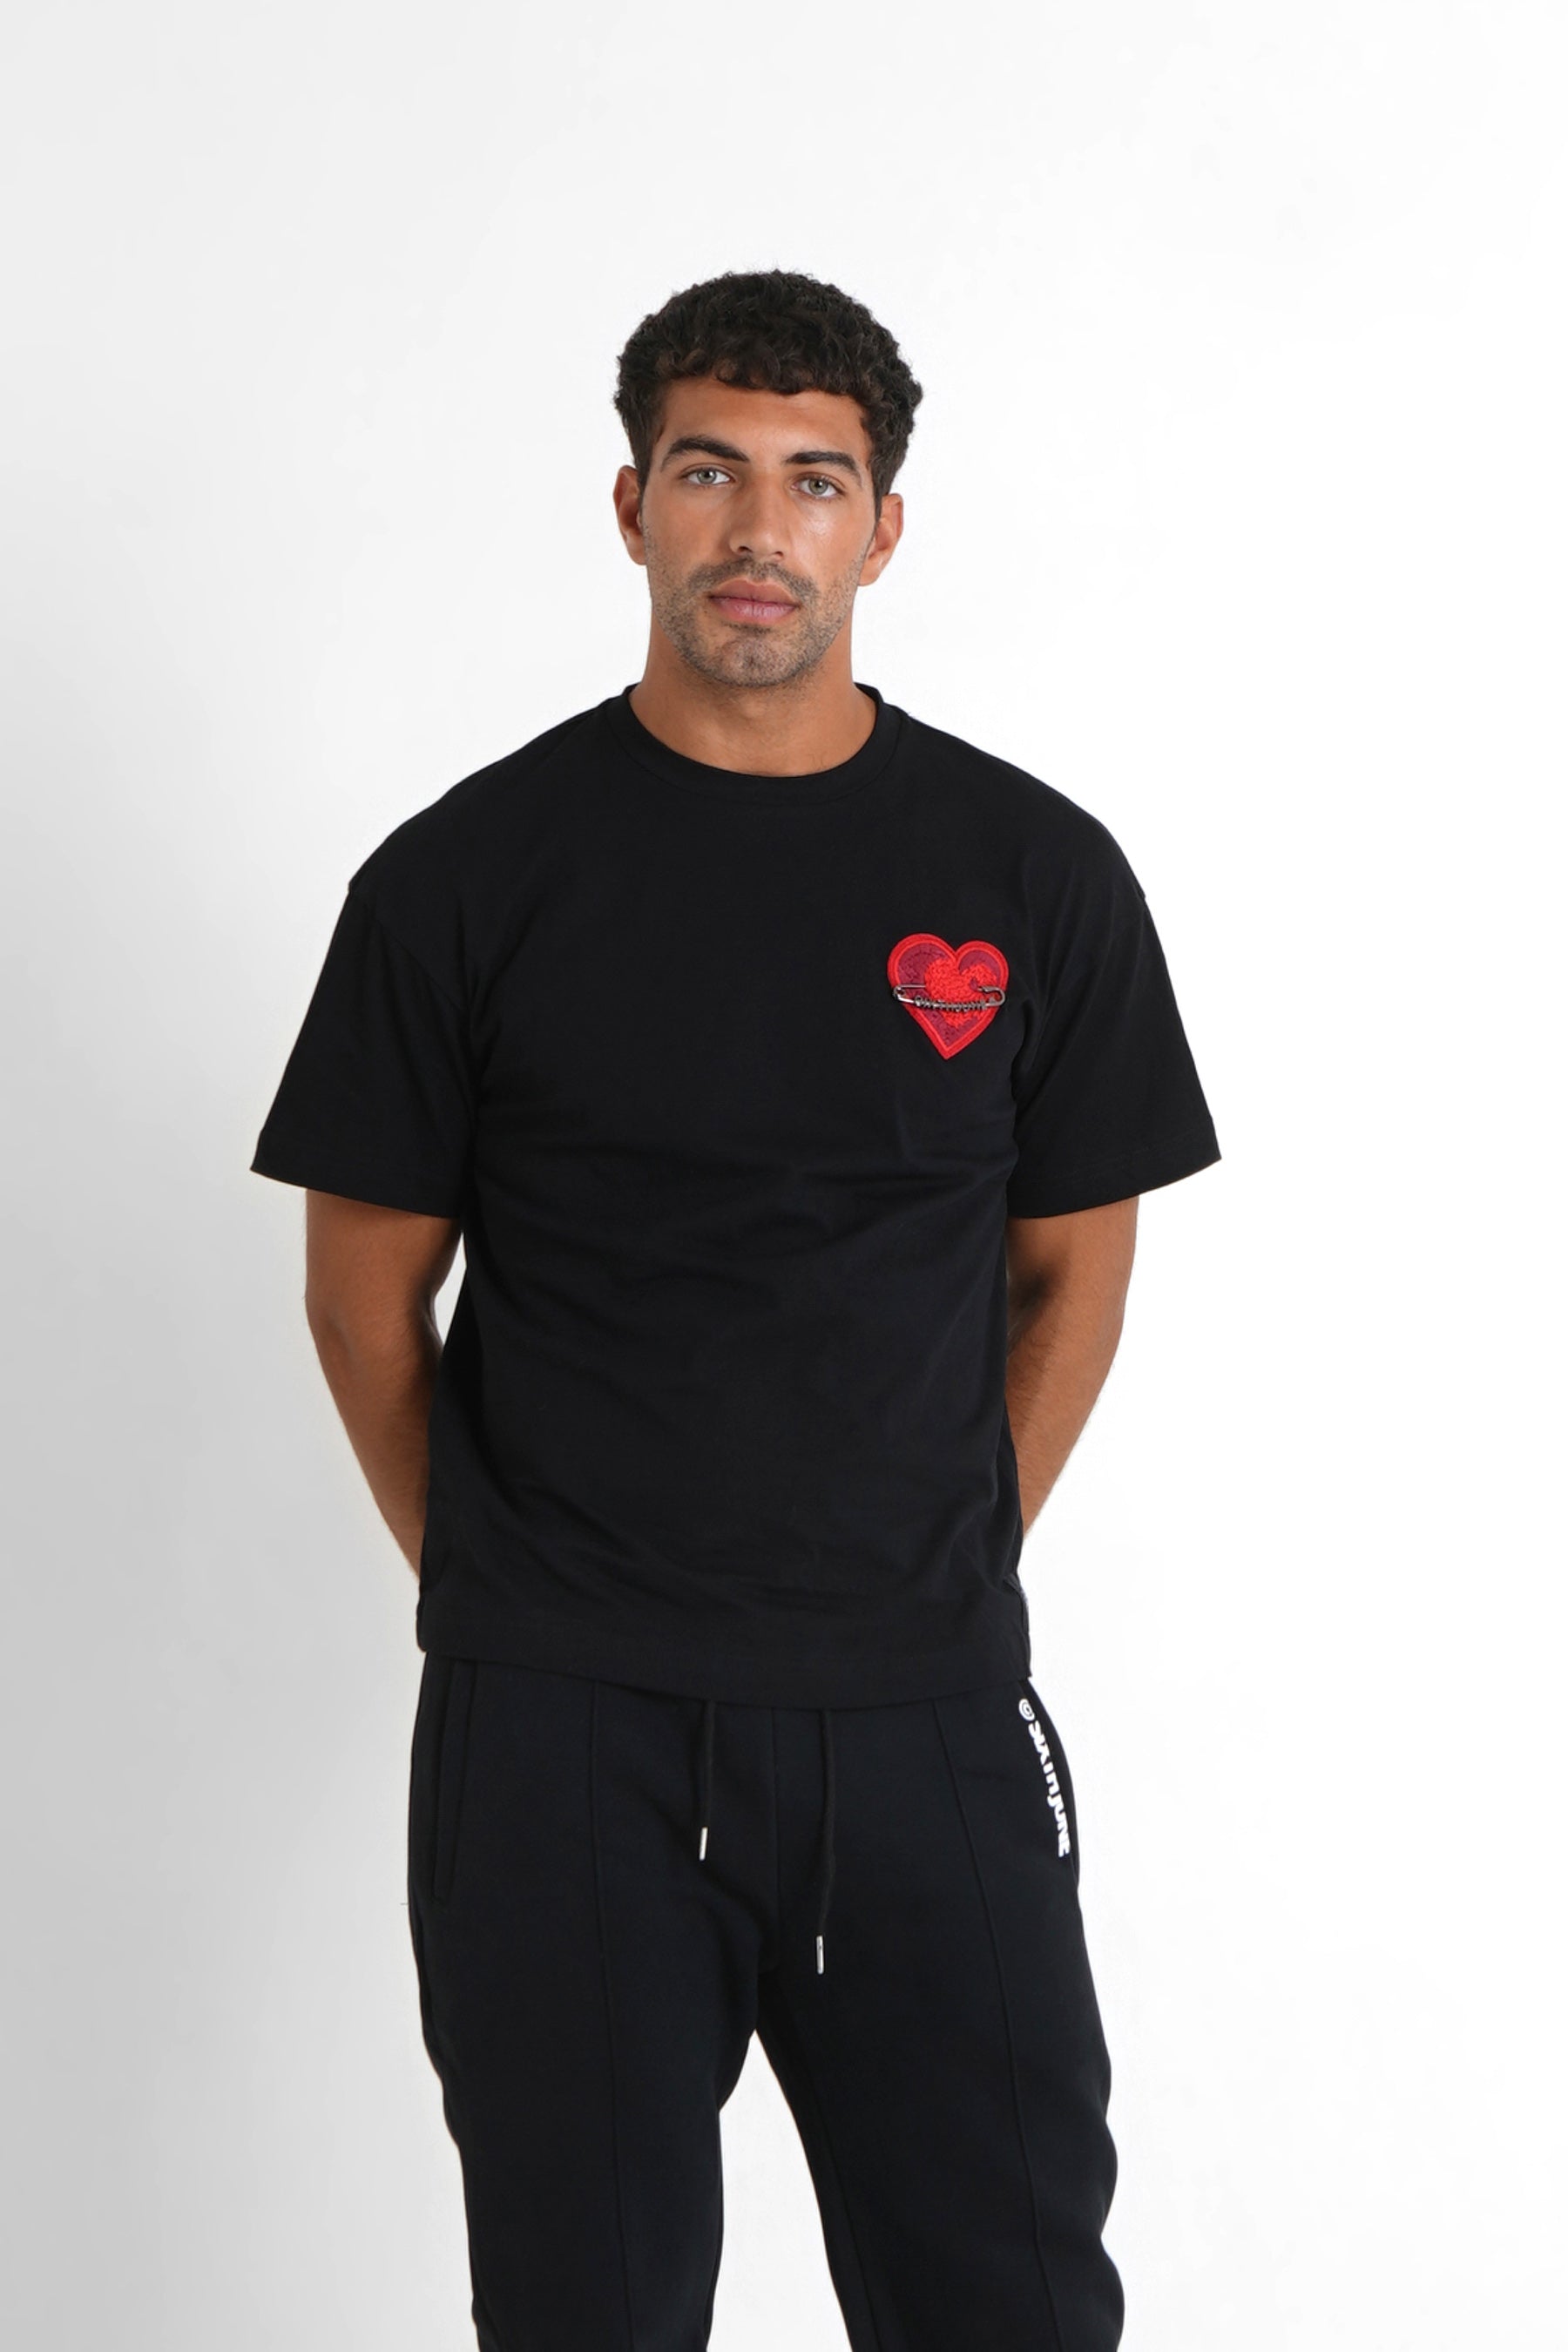 Sixth June heart print T-shirt in washed blue